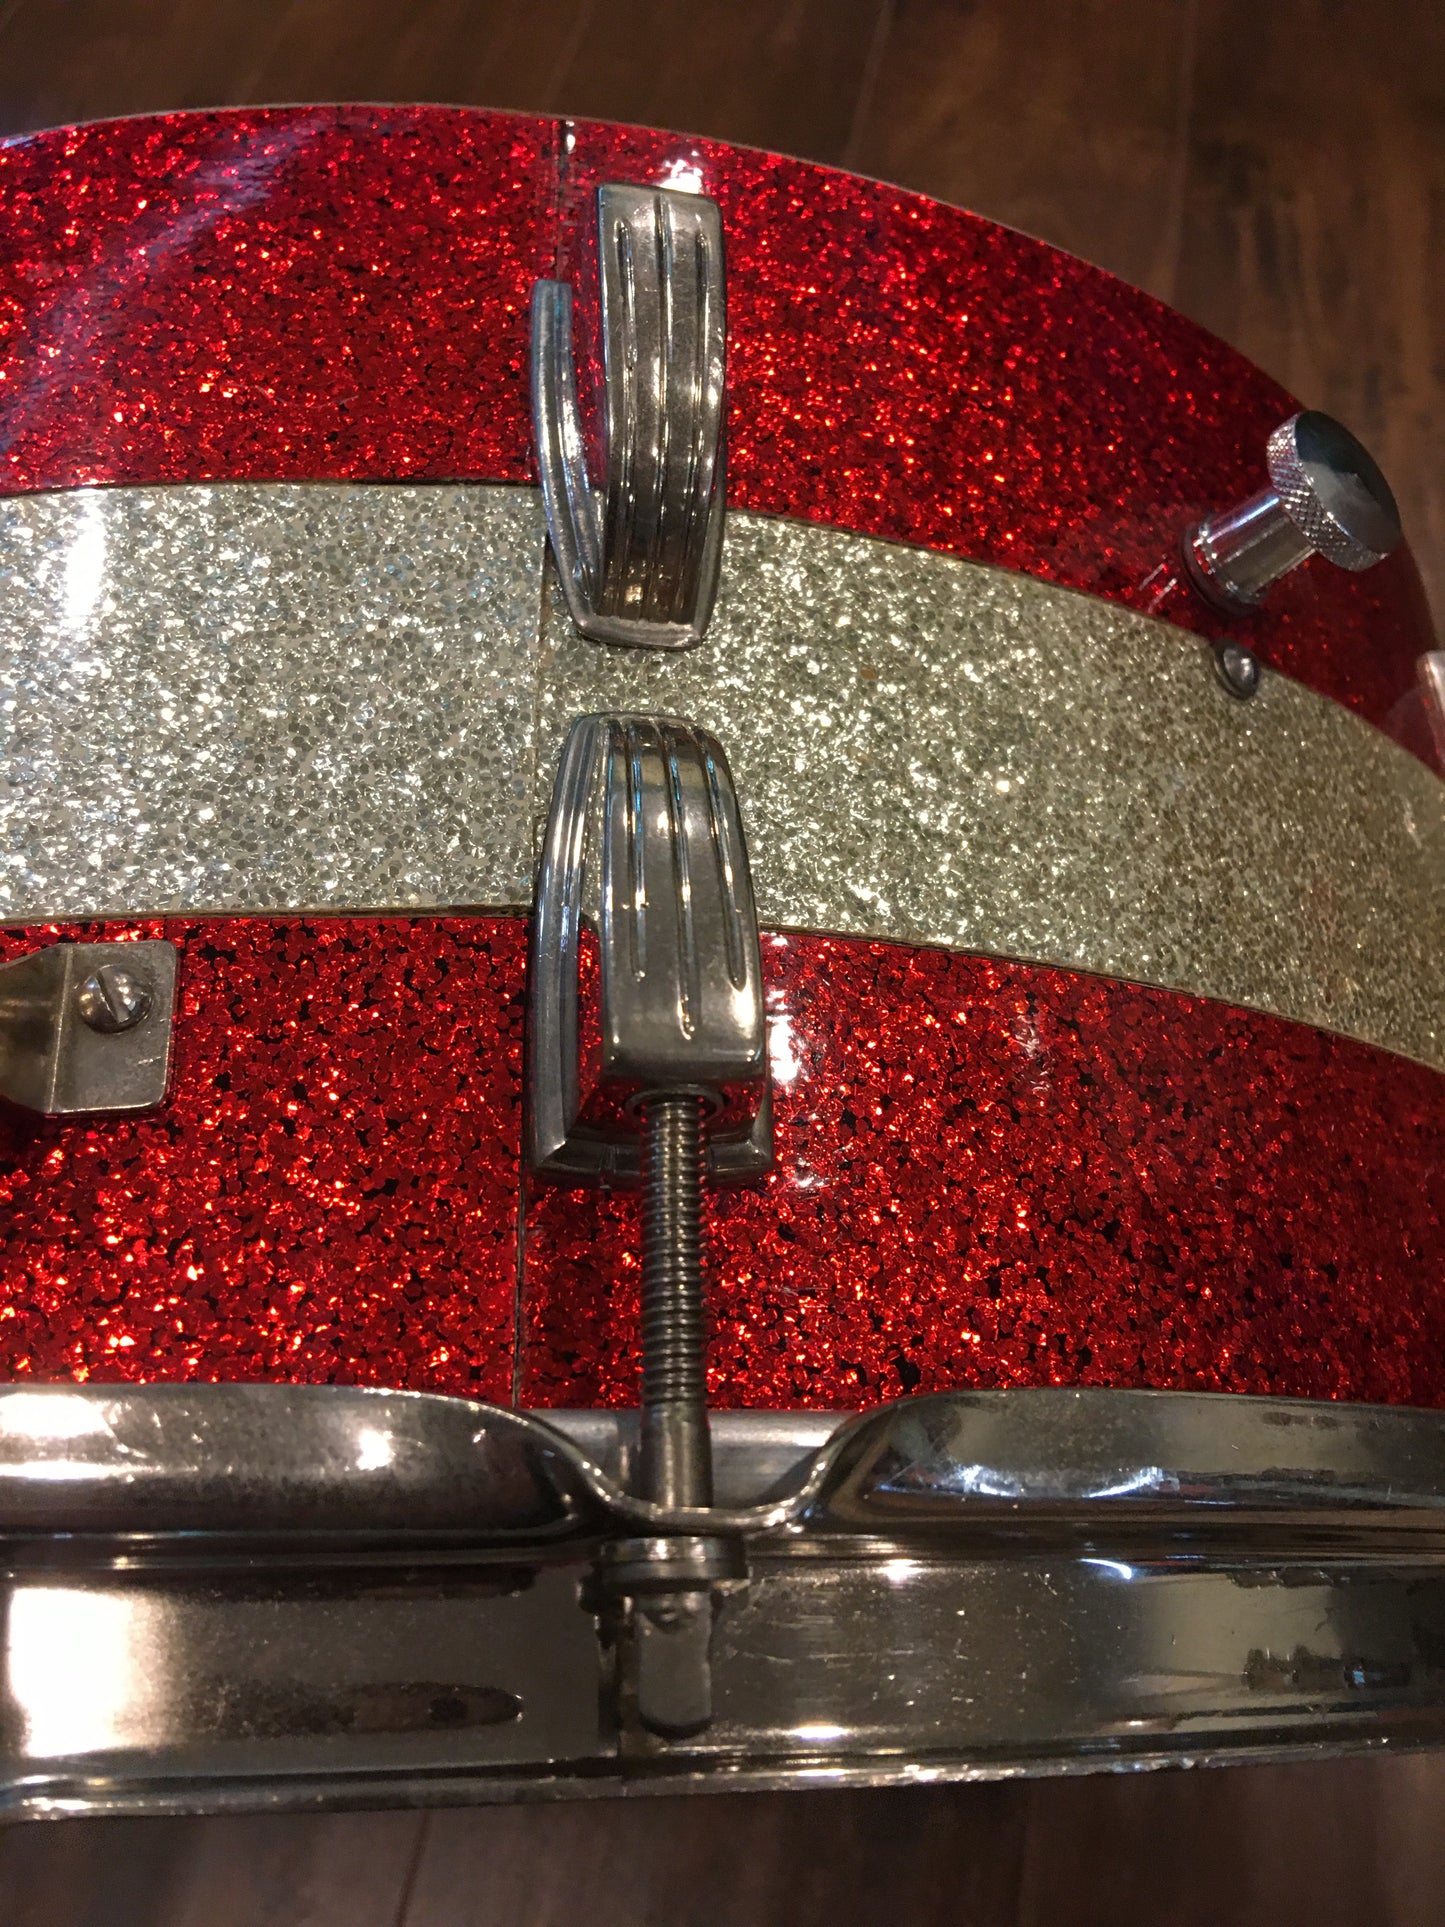 1961 Ludwig Pre-Serial # 6.5x15 School Festival Snare Drum Red Sparkle w/ Silver Sparkle Banding